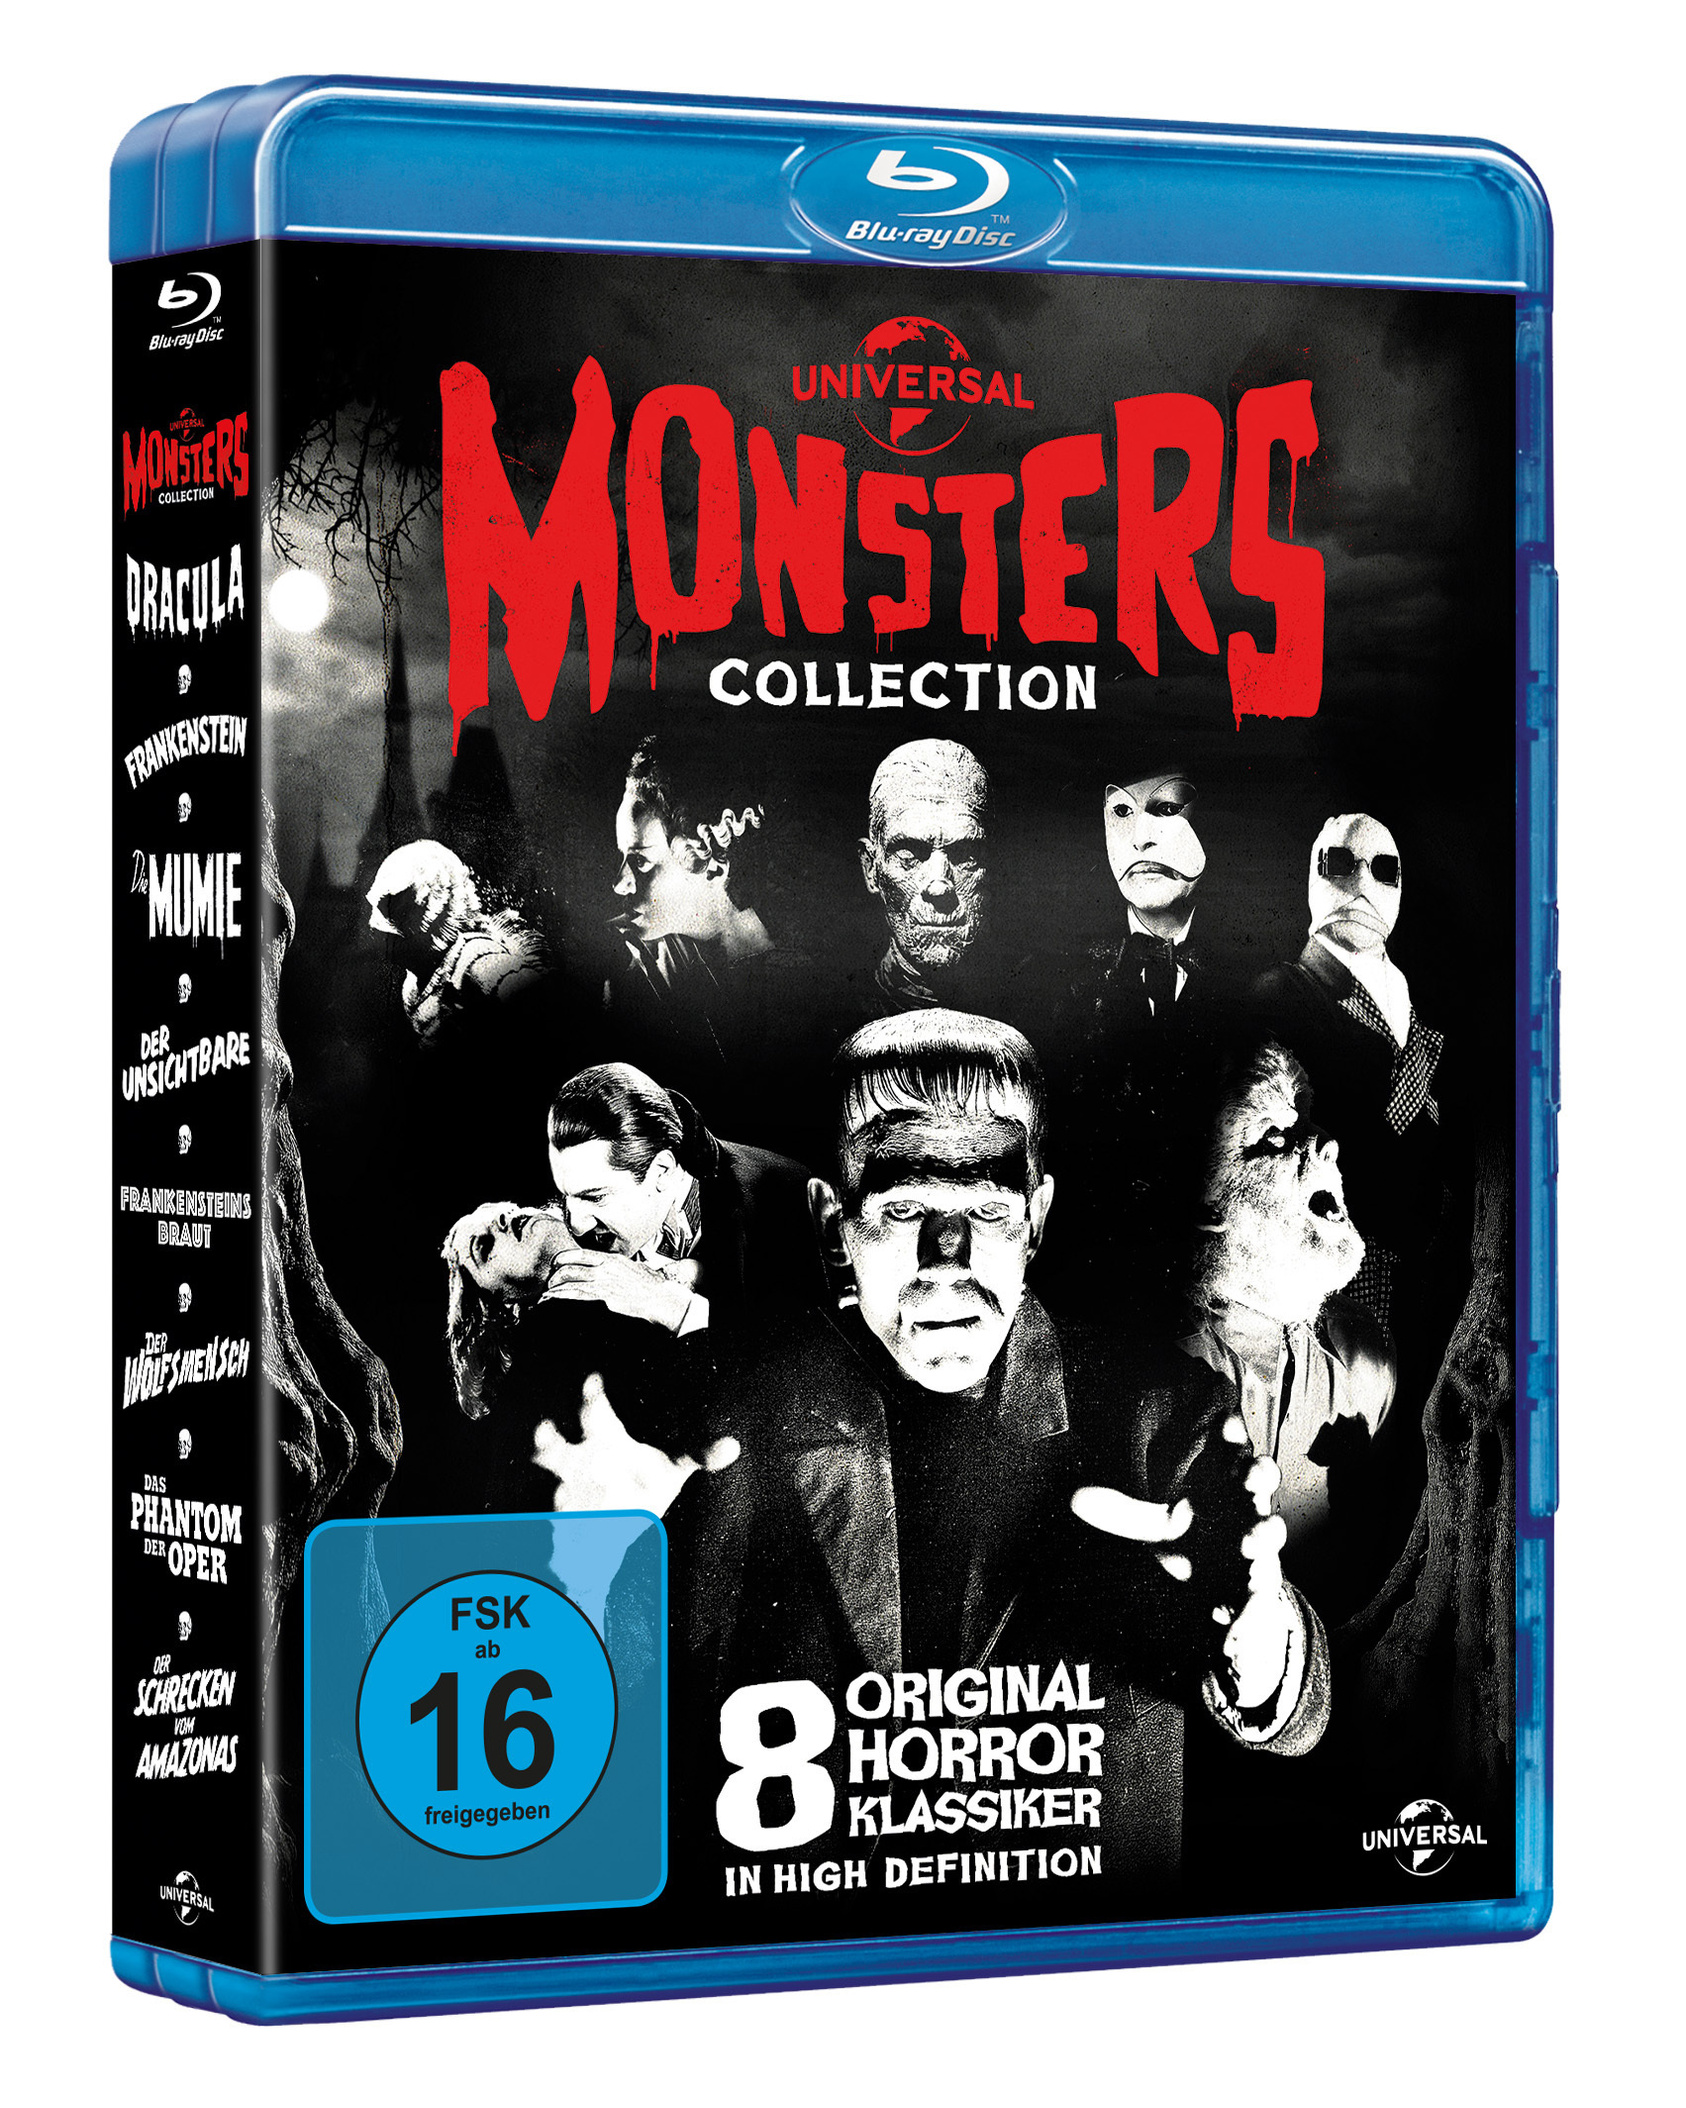 universal-monsters-collection-083862382.jpg